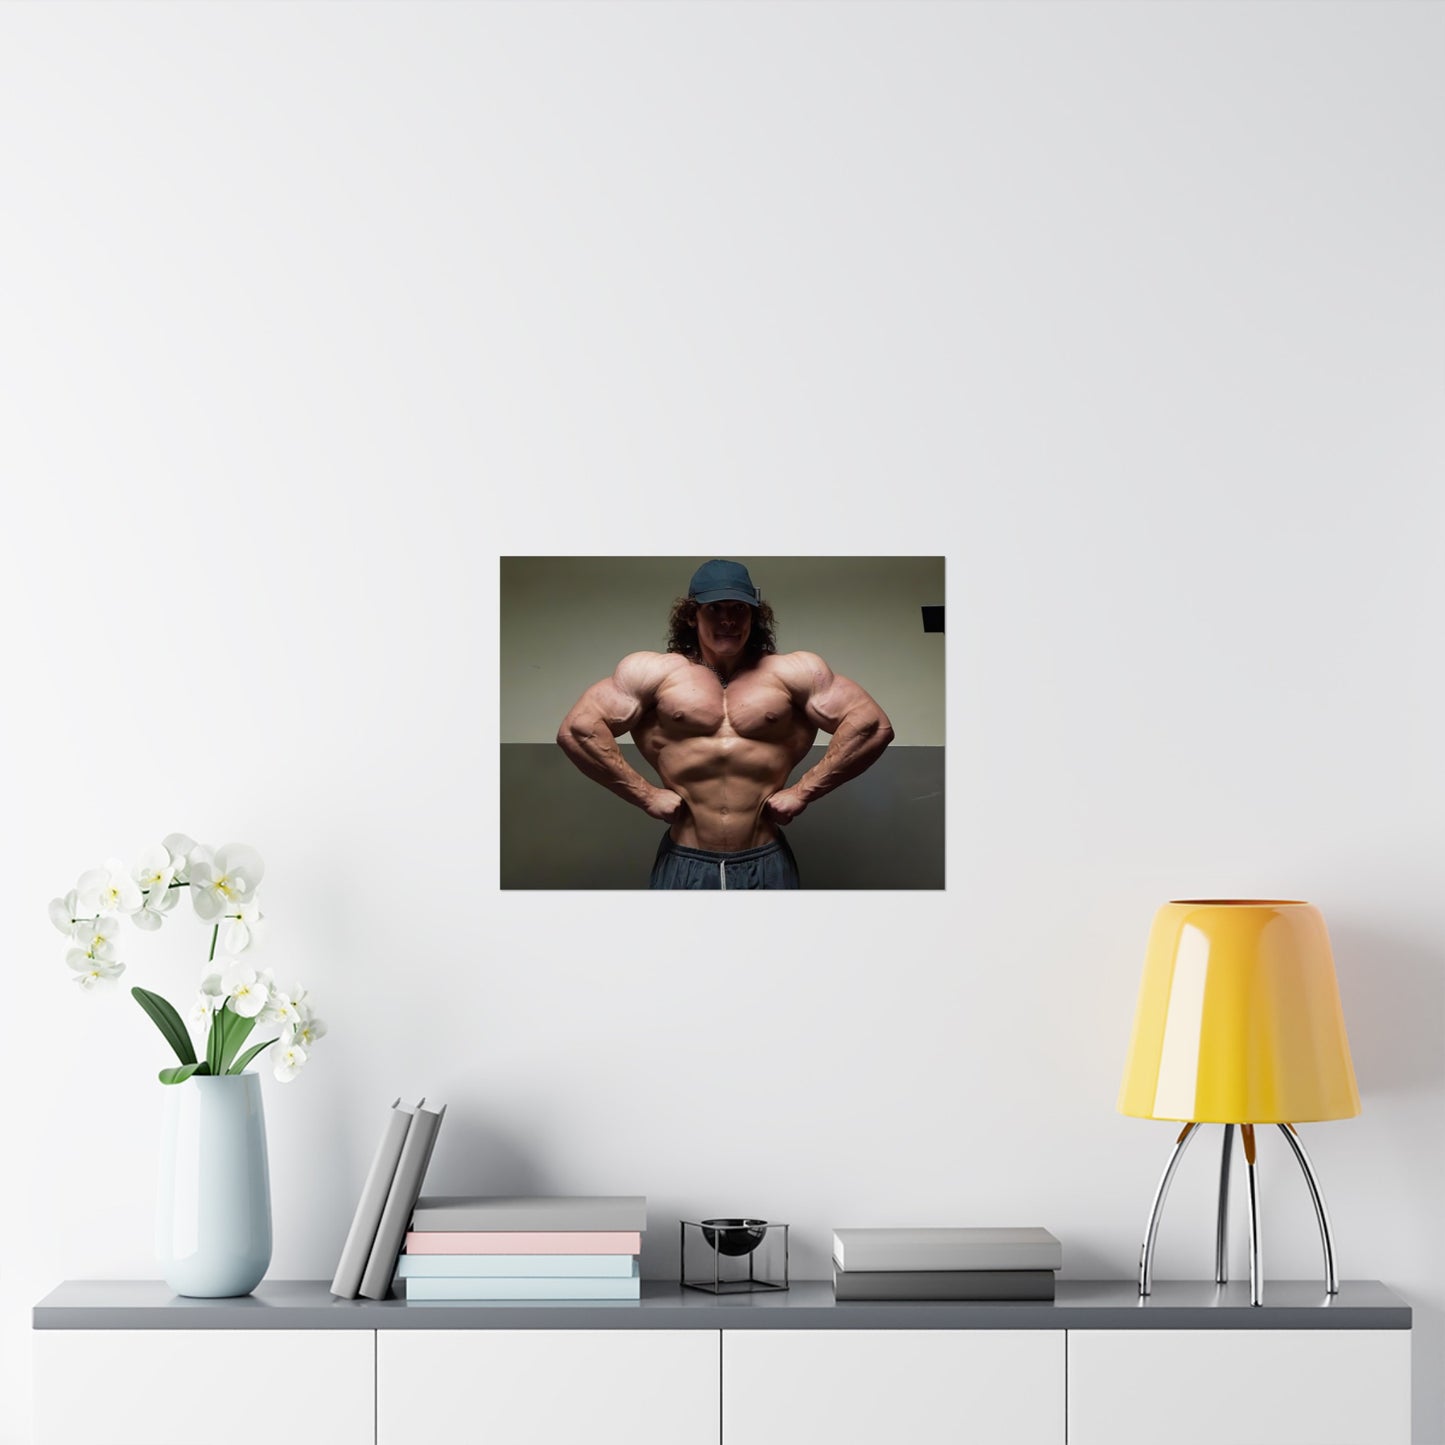 Fitness Influencer Sam Sulek Front Lat Spread Mirror Pose Poster